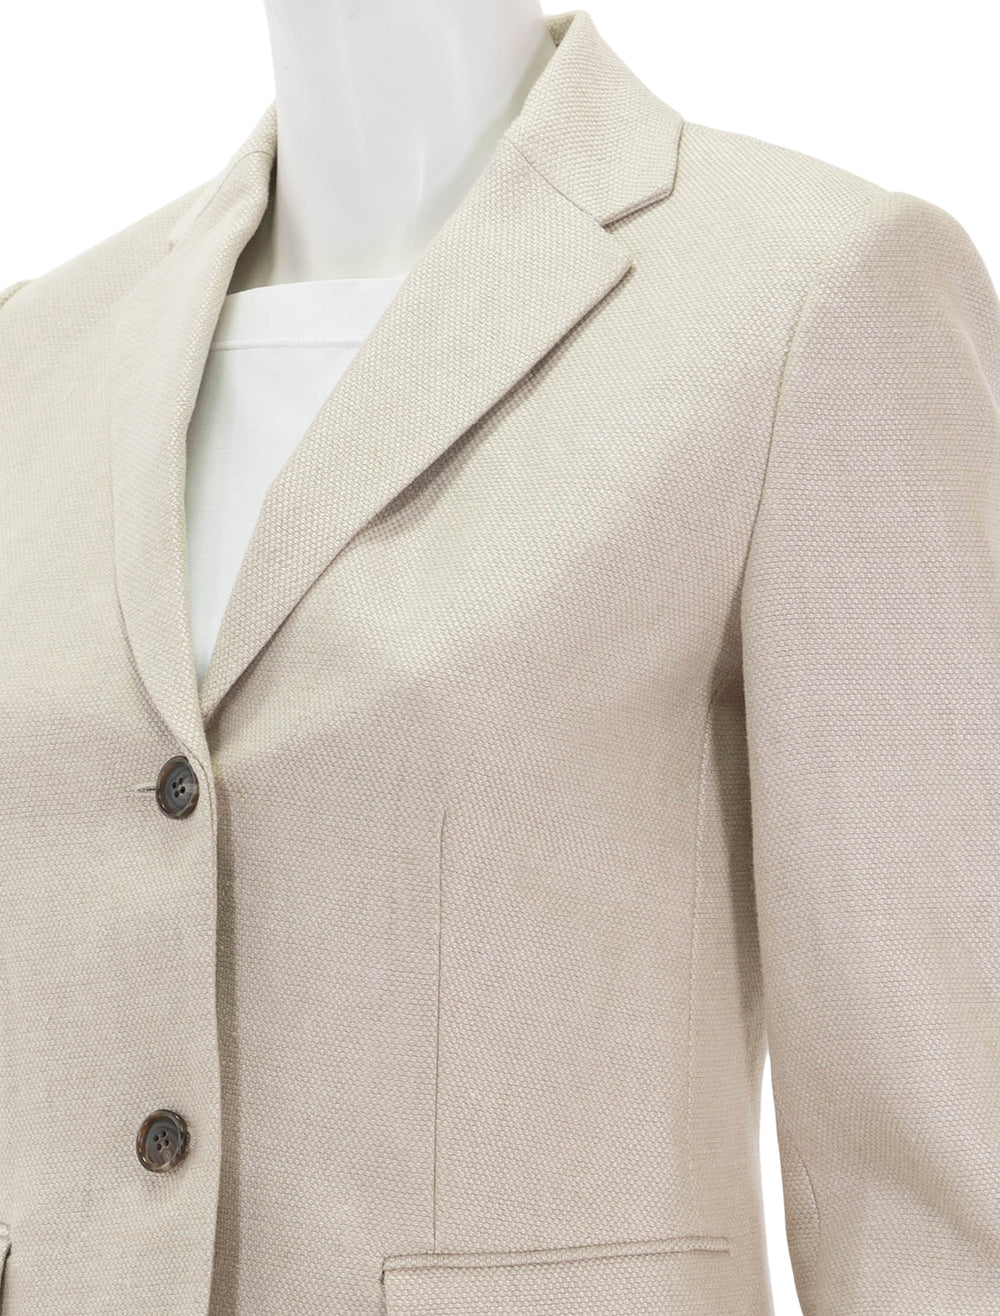 Close-up view of Theory's slim blazer in straw basketweave linen.